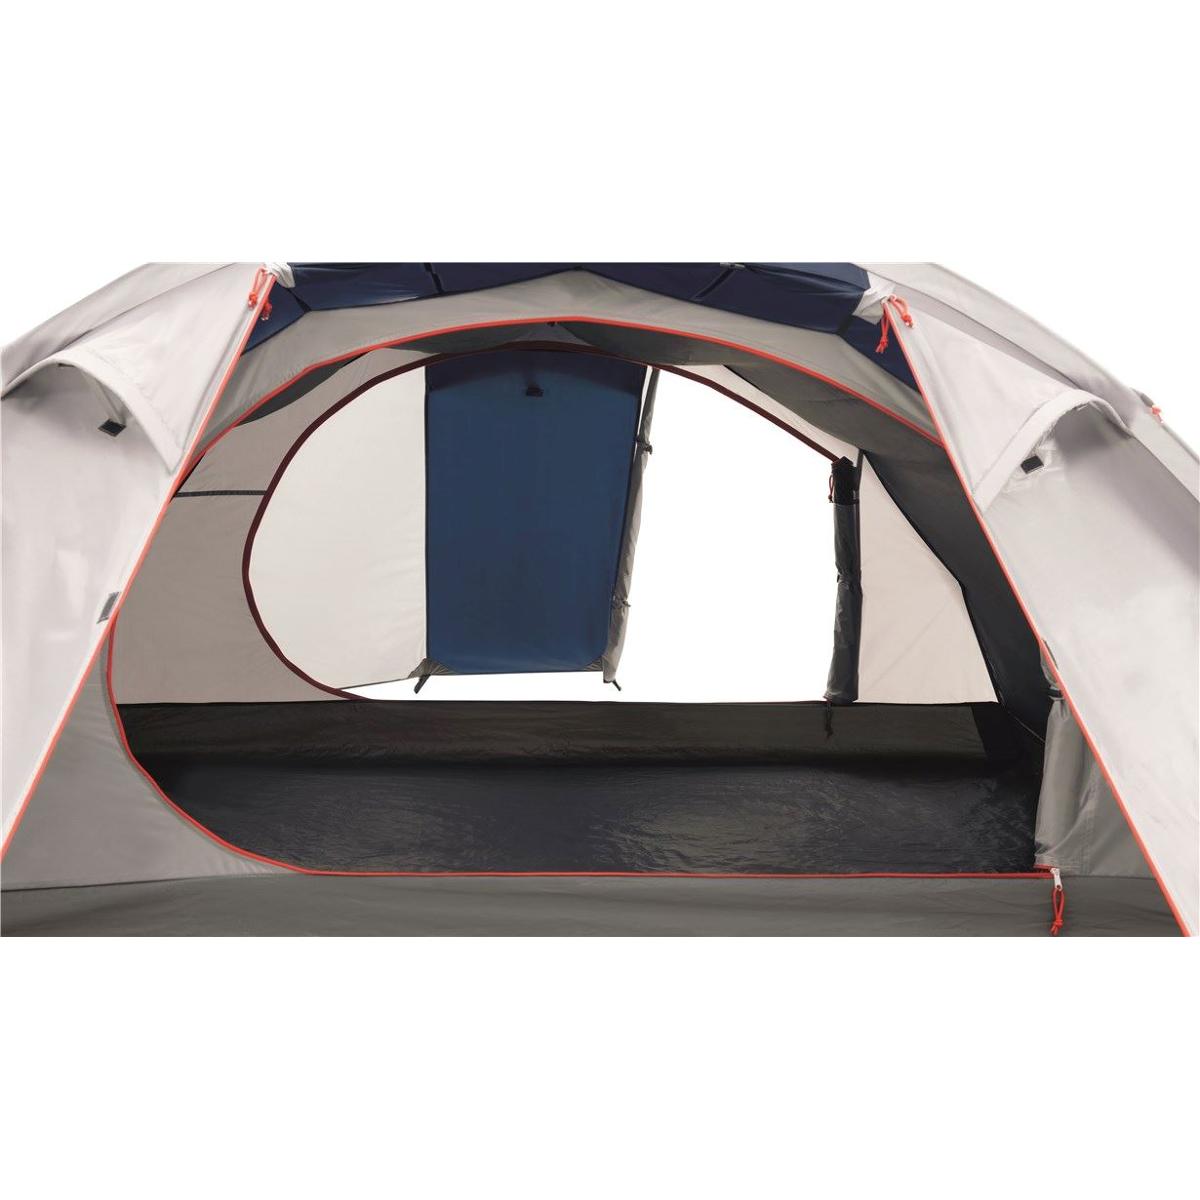 Easy Camp Vega 300 Compact 240x235cm, 3-Personen, Wagner blau bei Campingzubehör Tunnelzelt, Camping